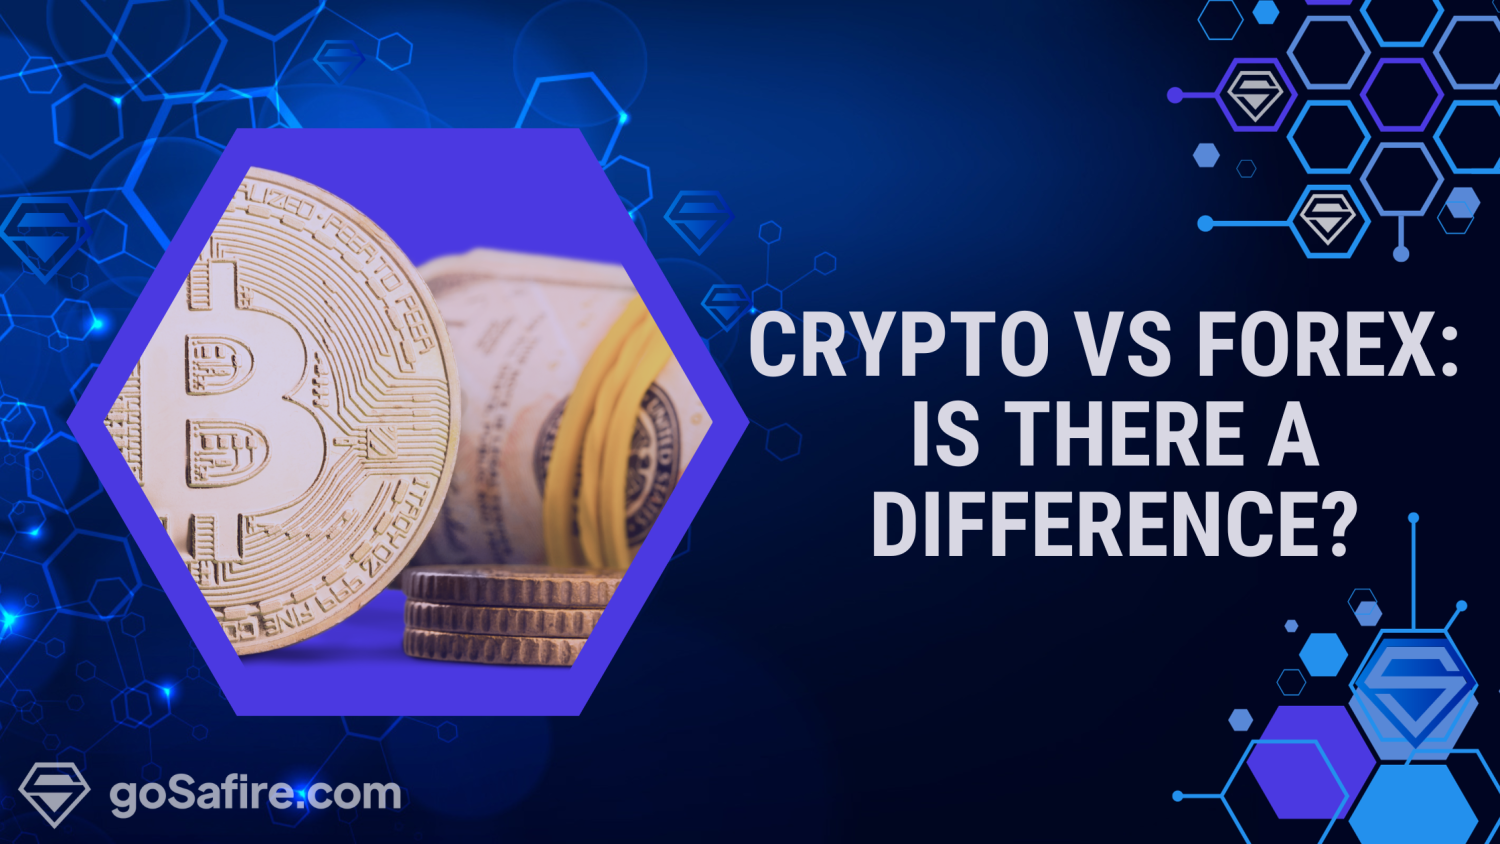 Crypto vs. Forex: Is there a difference?